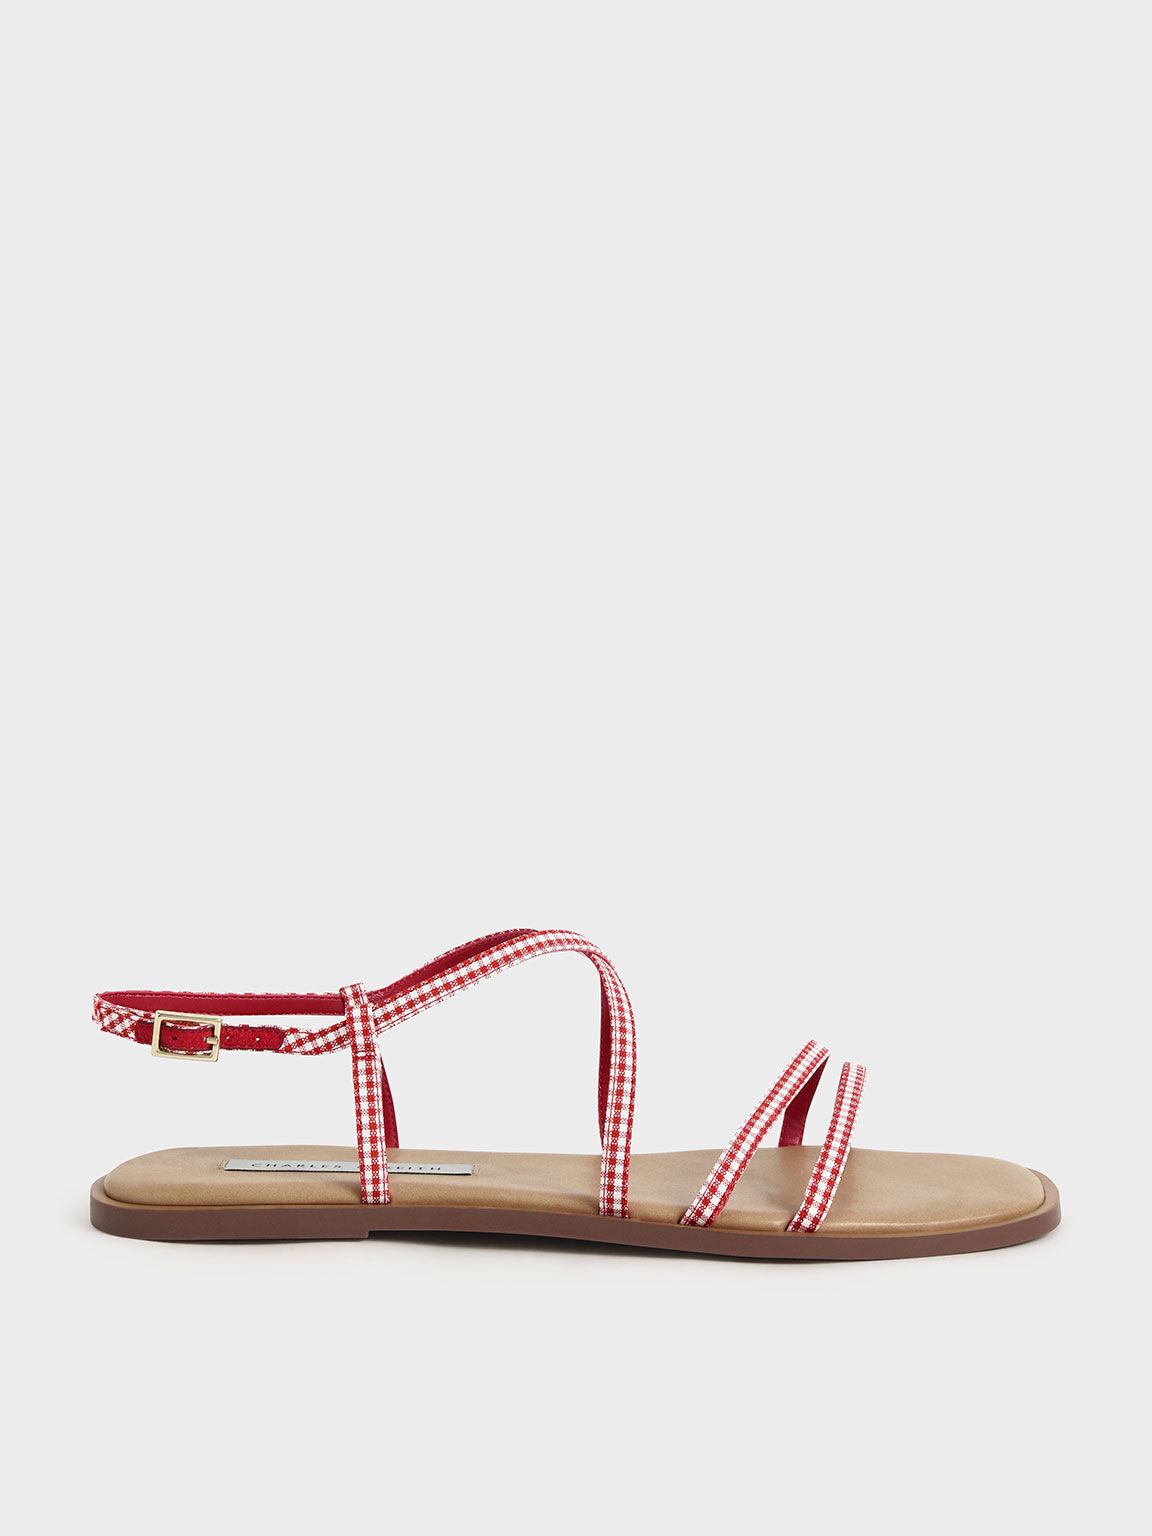 Check-Print Strappy Flat Sandals, Red, hi-res